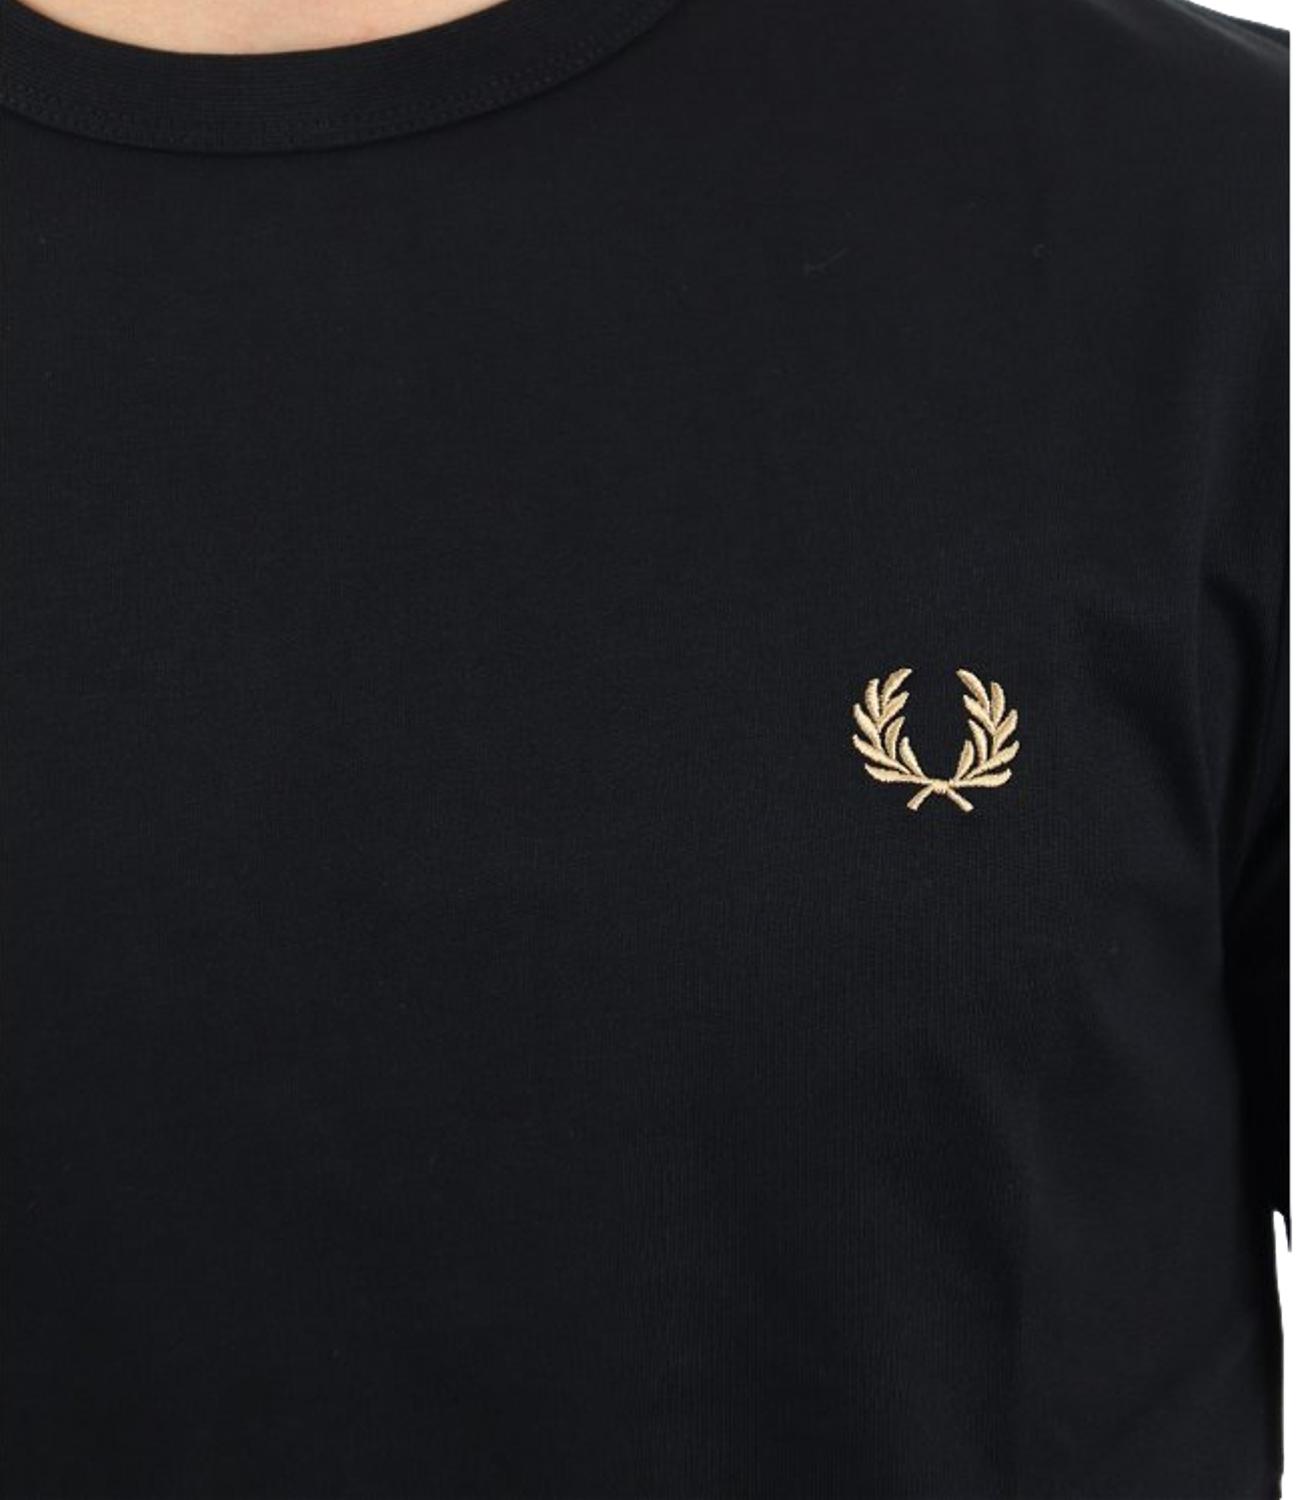 Fred Perry t-shirt nera uomo ringer